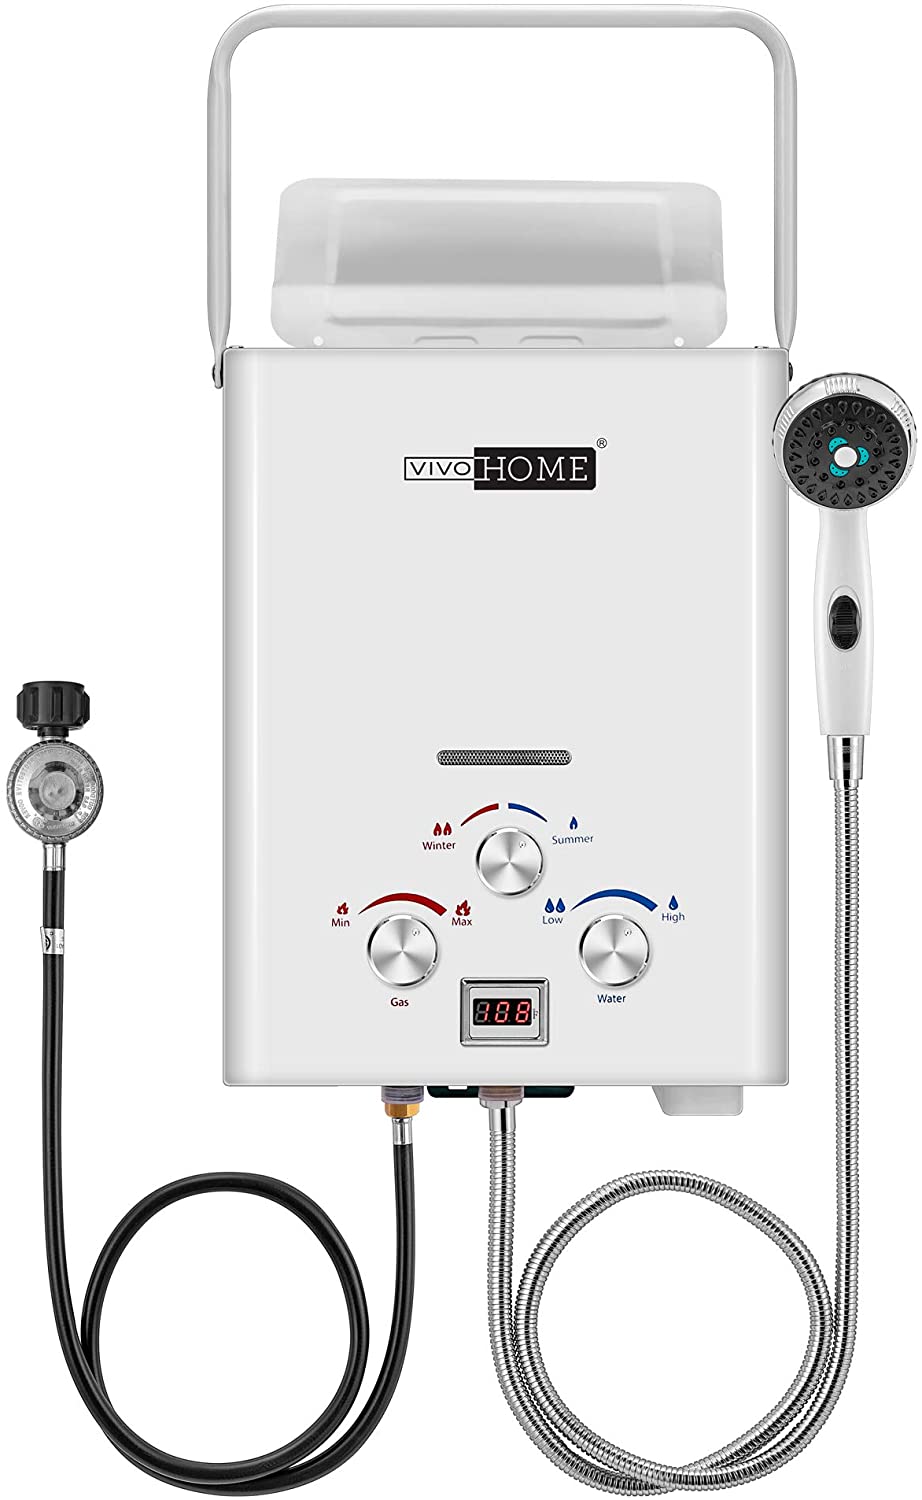 VIVOHOME Outdoor Portable 1.6GMP 6L Propane Gas Tankless Water Heater